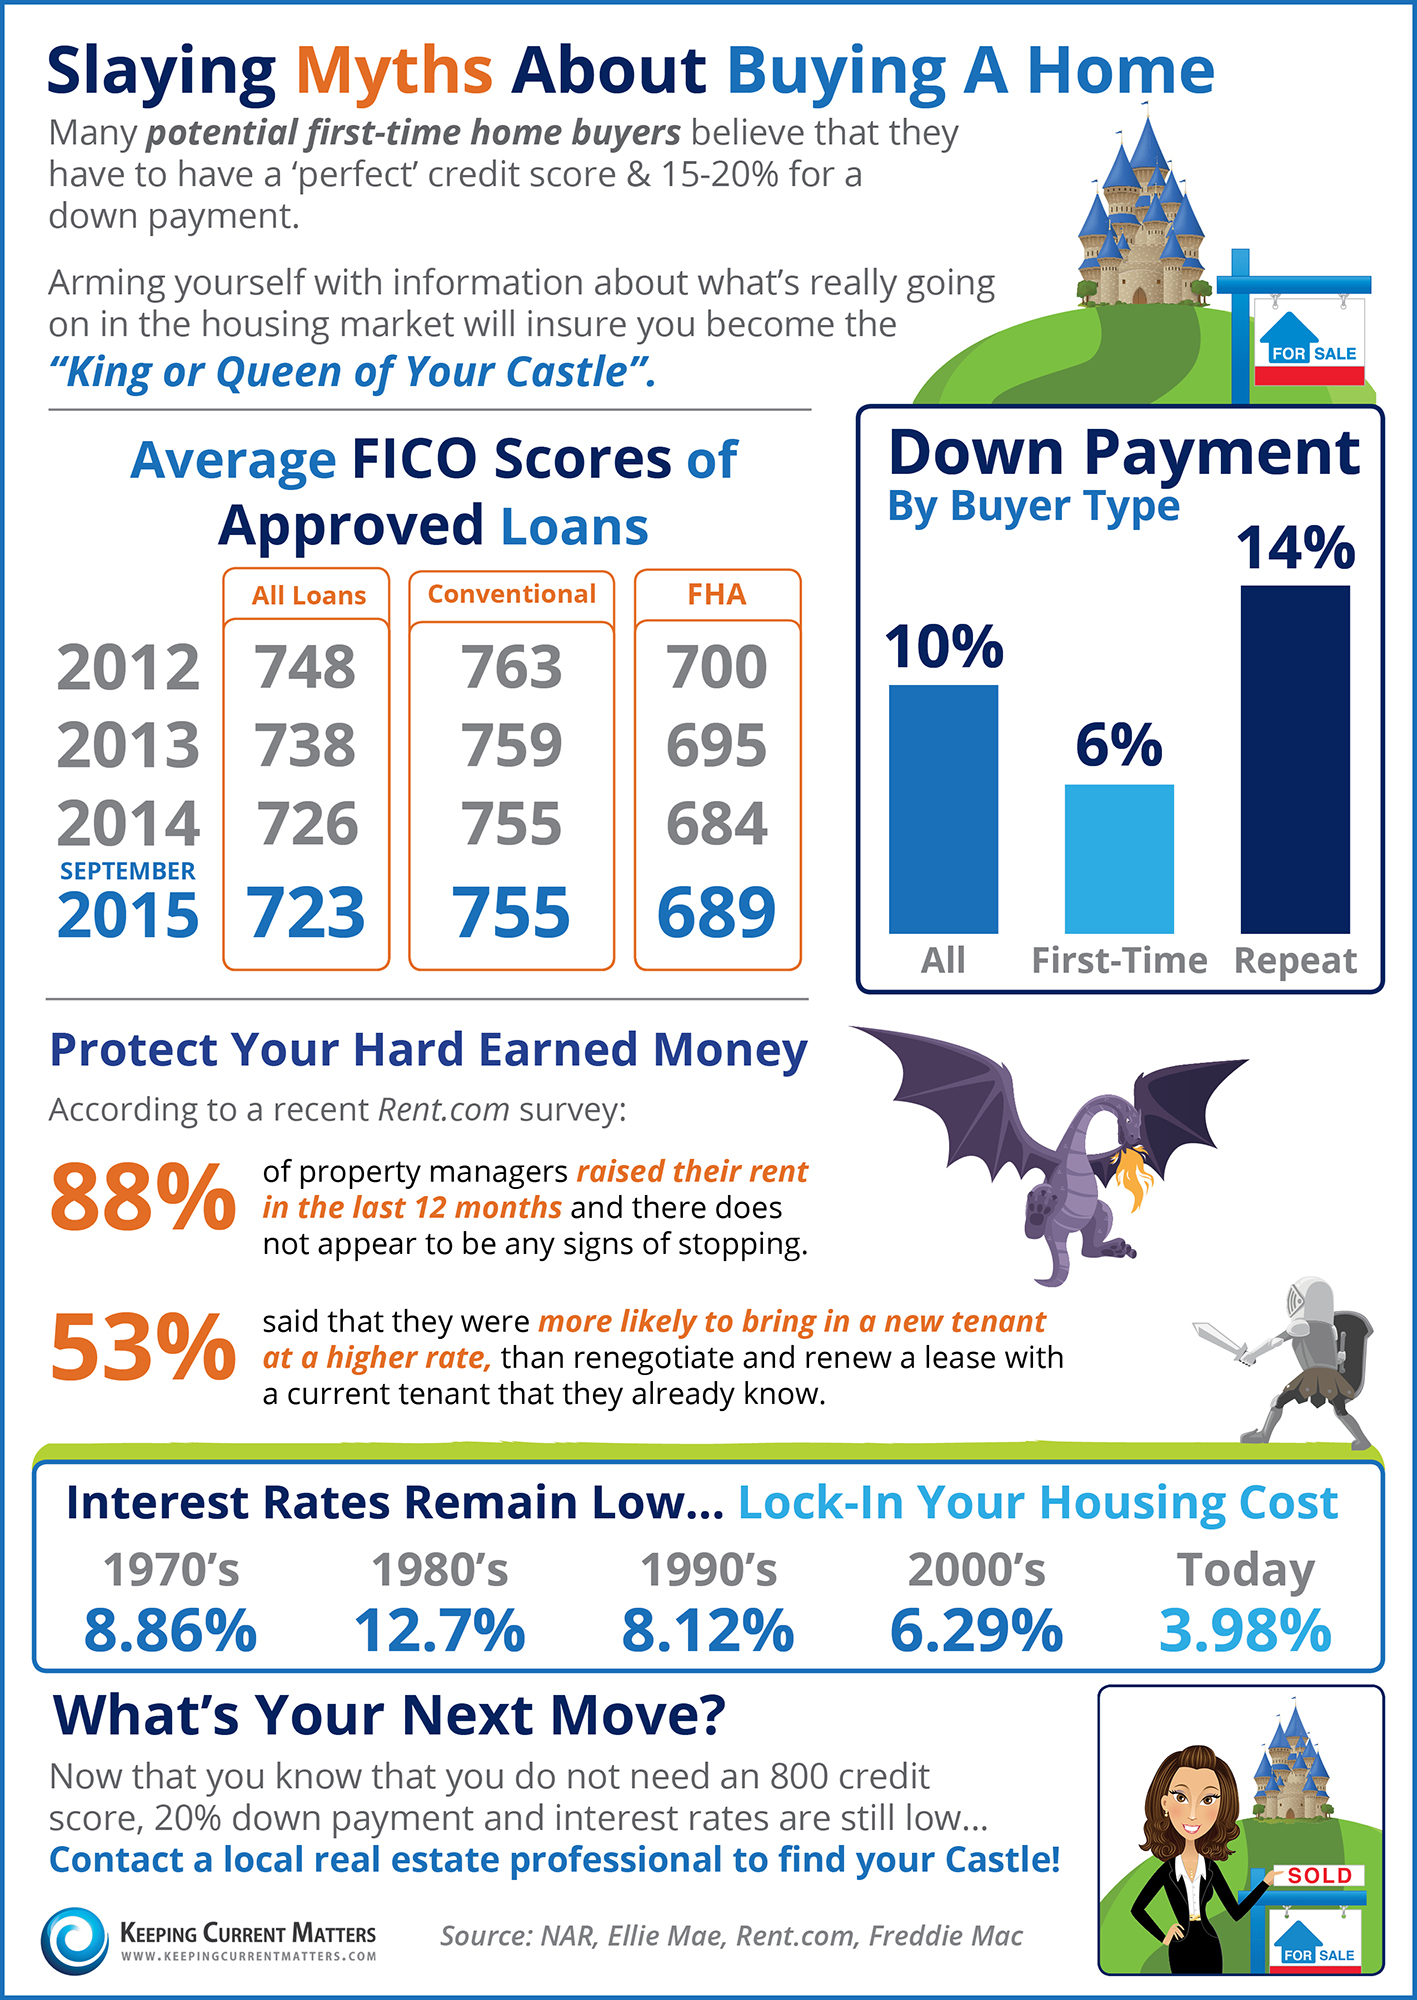 Slaying Myths About Buying A Home [INFOGRAPHIC] | Keeping Current Matters